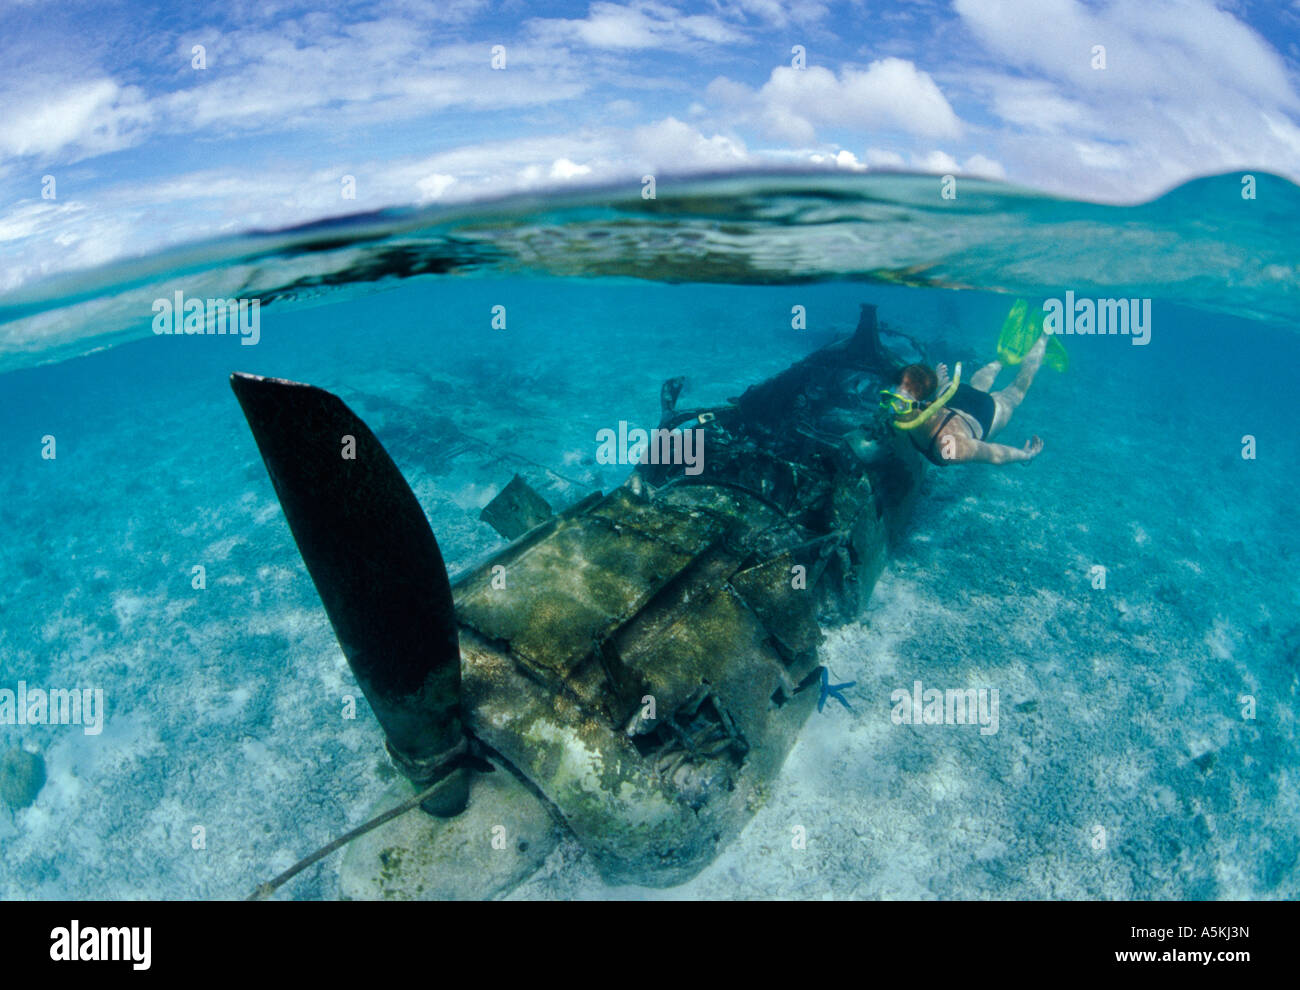 Under over photo of Japanese Zero fighter and snorkeler in shallow water Palau Micronesia Stock Photo